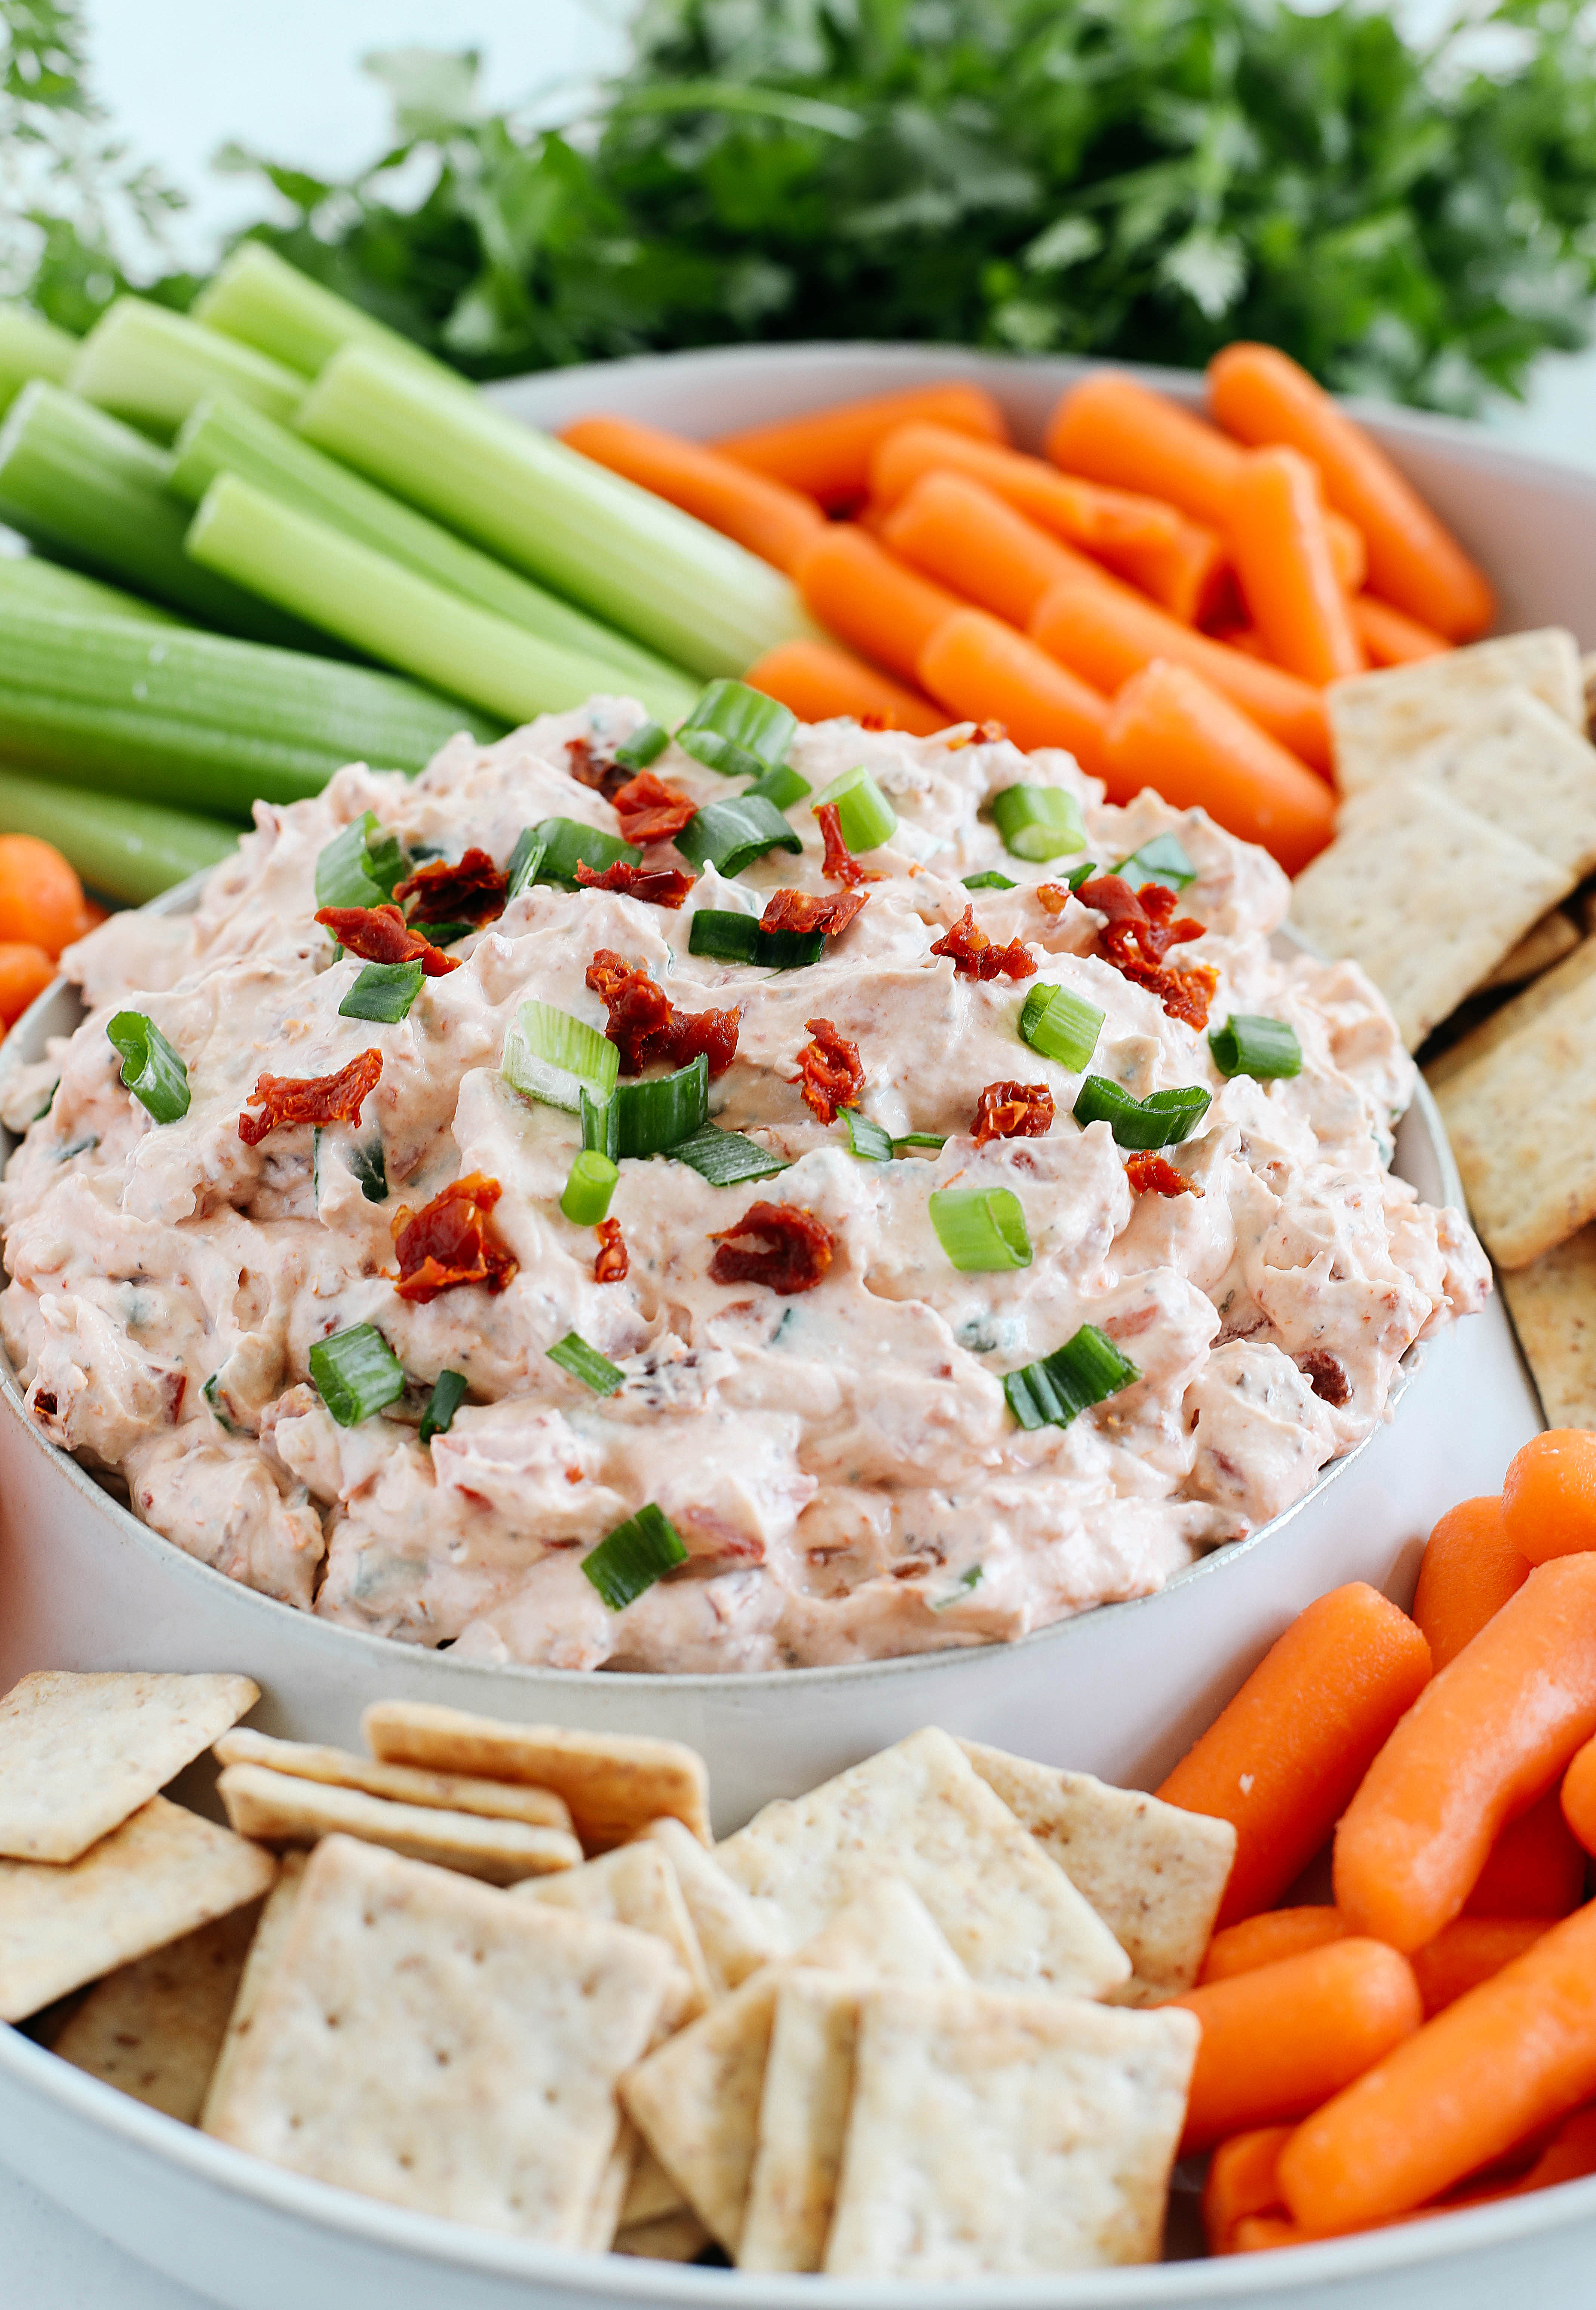 Creamy and delicious Sun Dried Tomato Dip with tons of flavor and easily made in just minutes for the perfect crowd-pleasing appetizer!